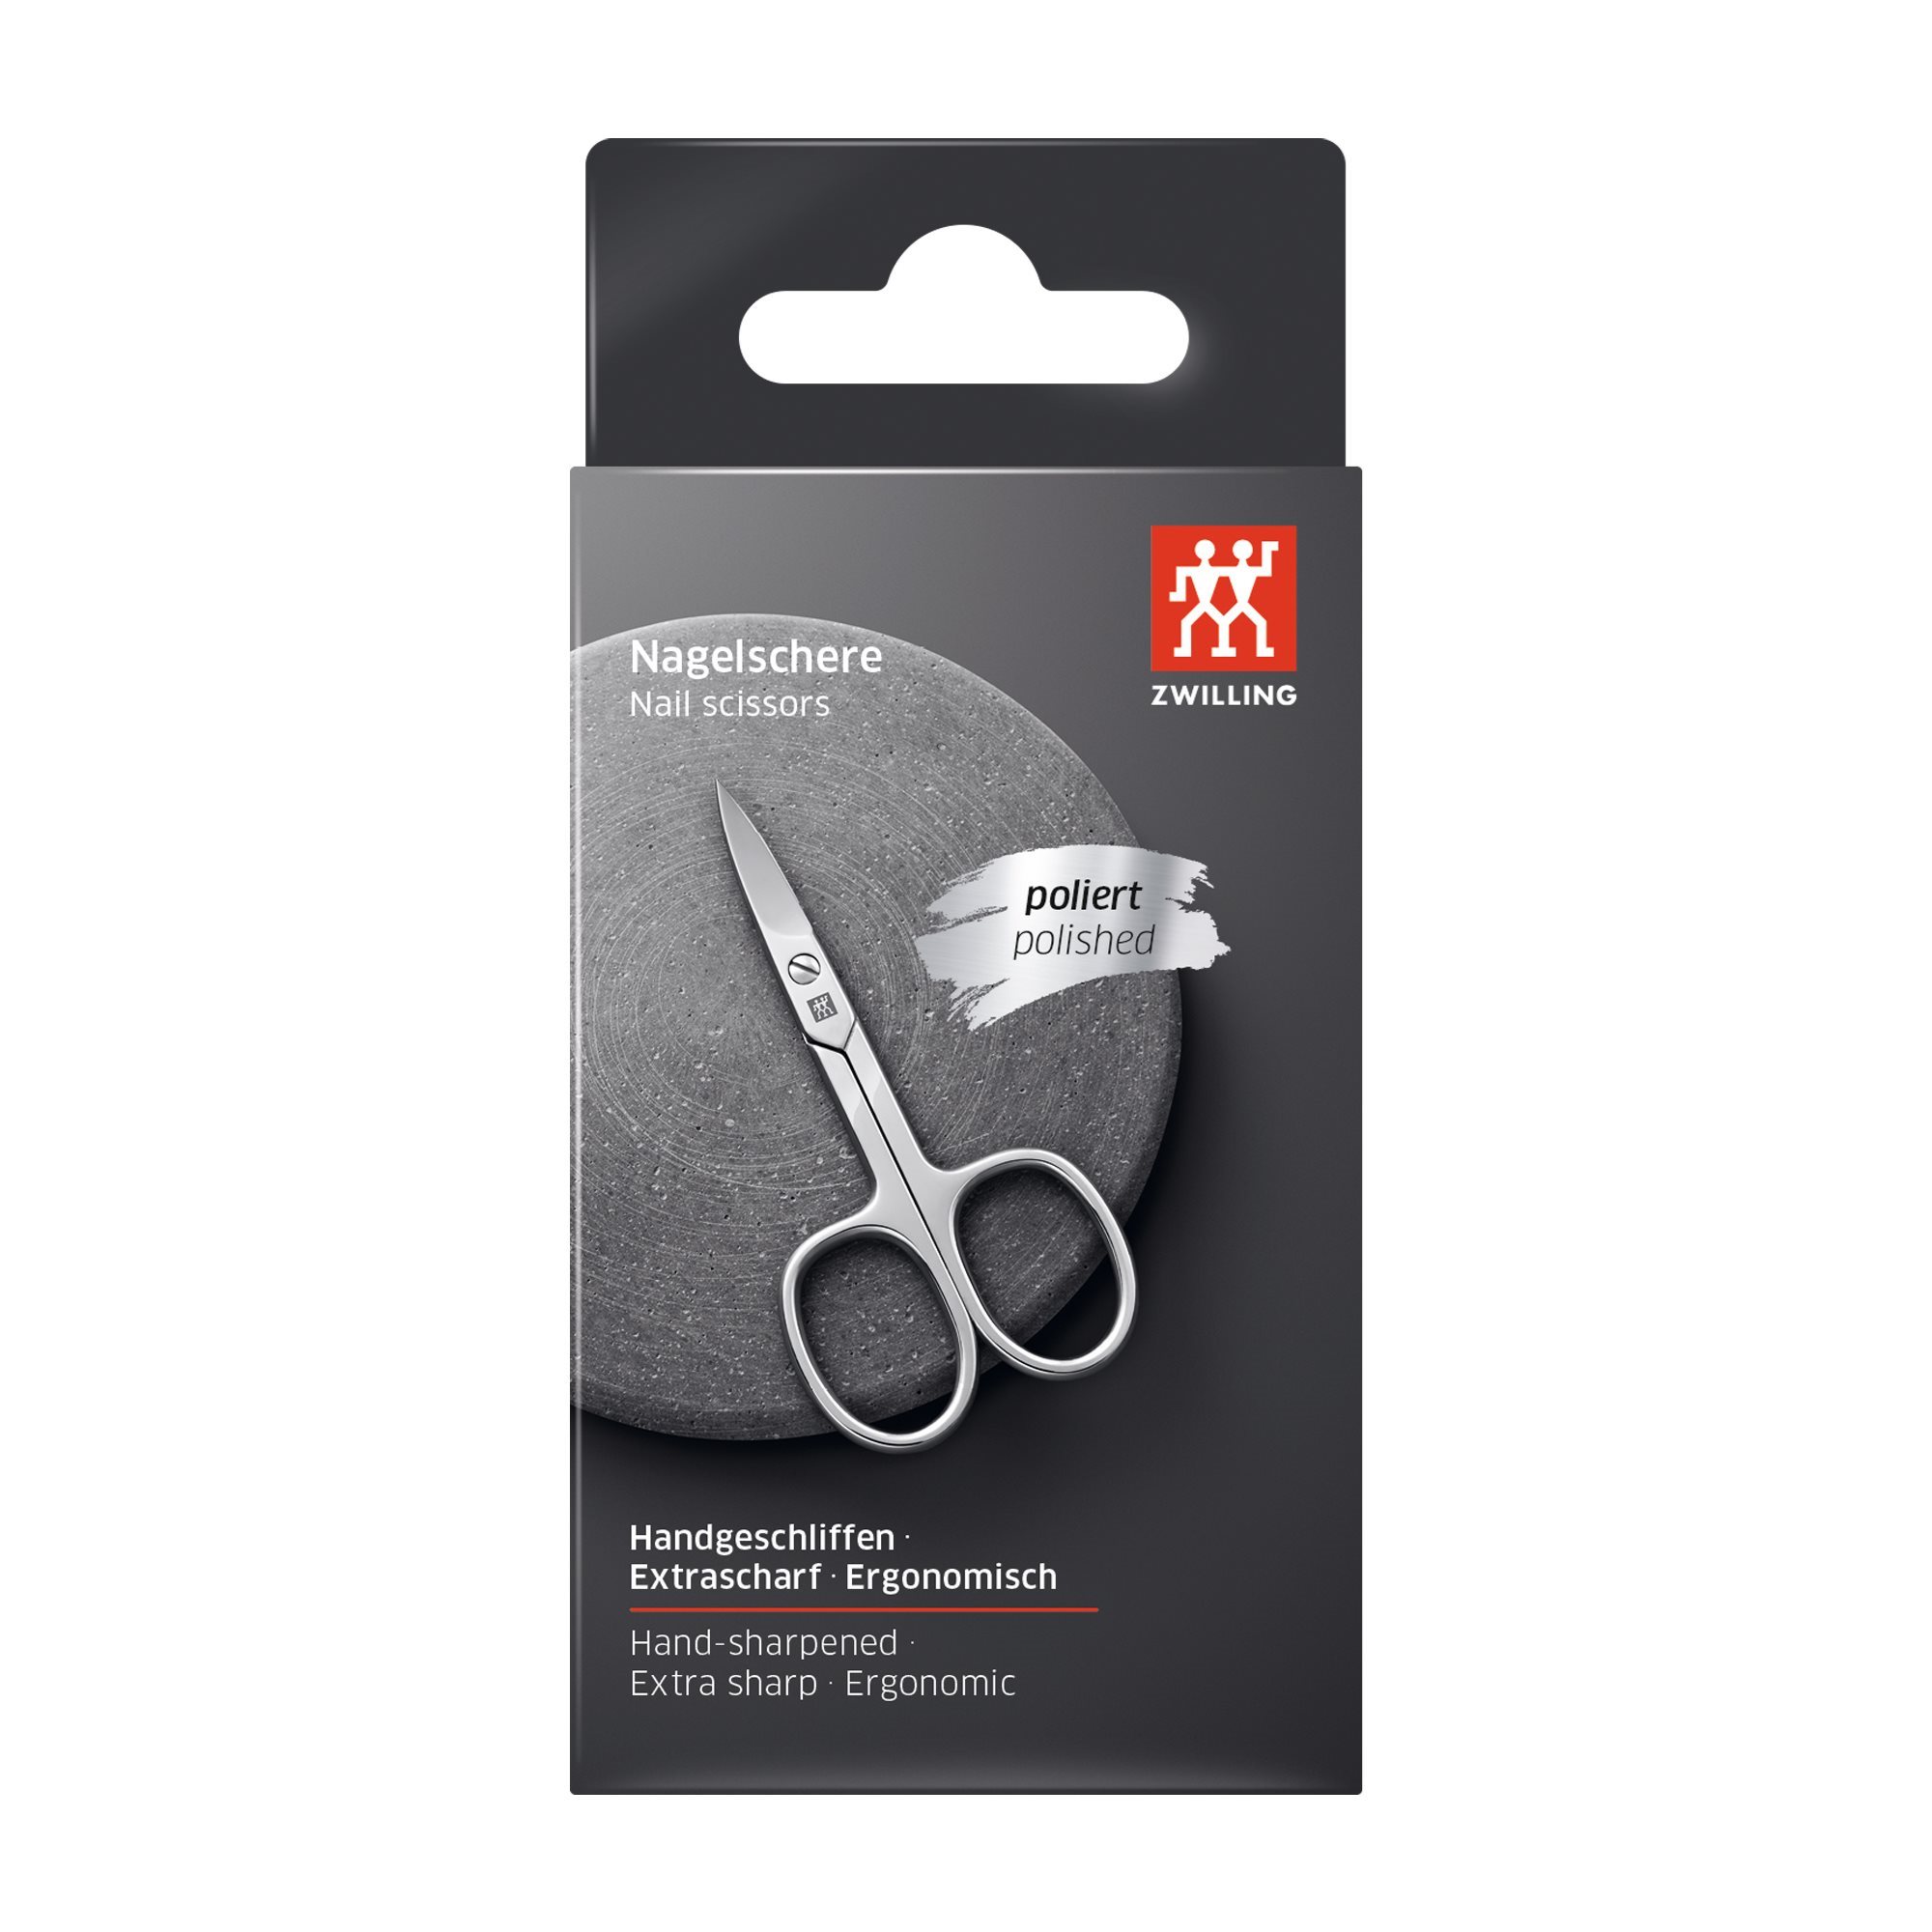  ZWILLING nail scissors premium scissors for hands and feet,  stainless steel, polished, 90 mm : Beauty & Personal Care